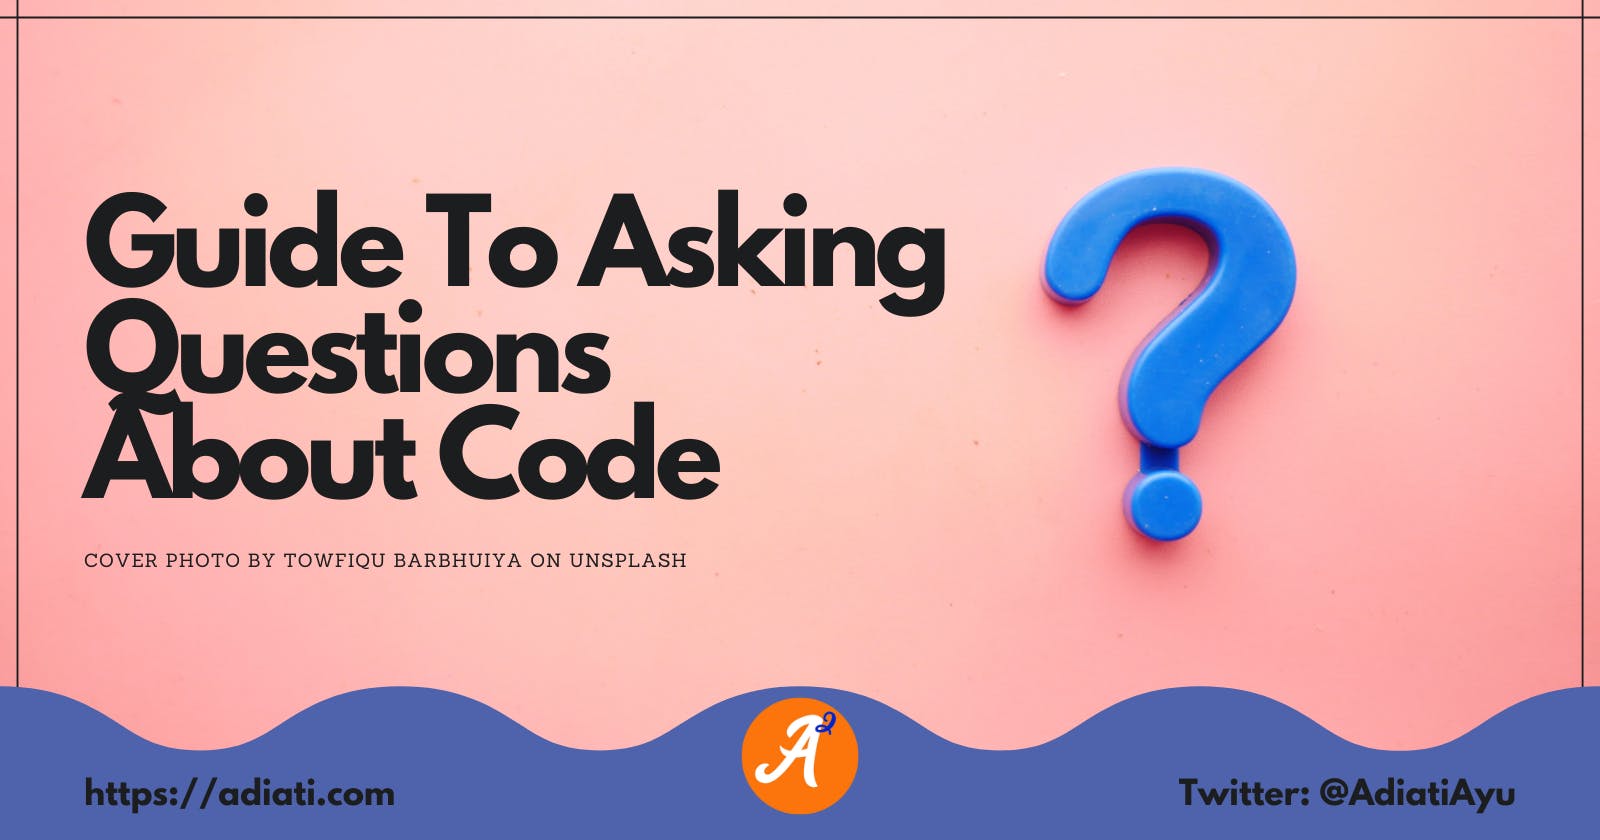 Guide To Asking Questions About Code